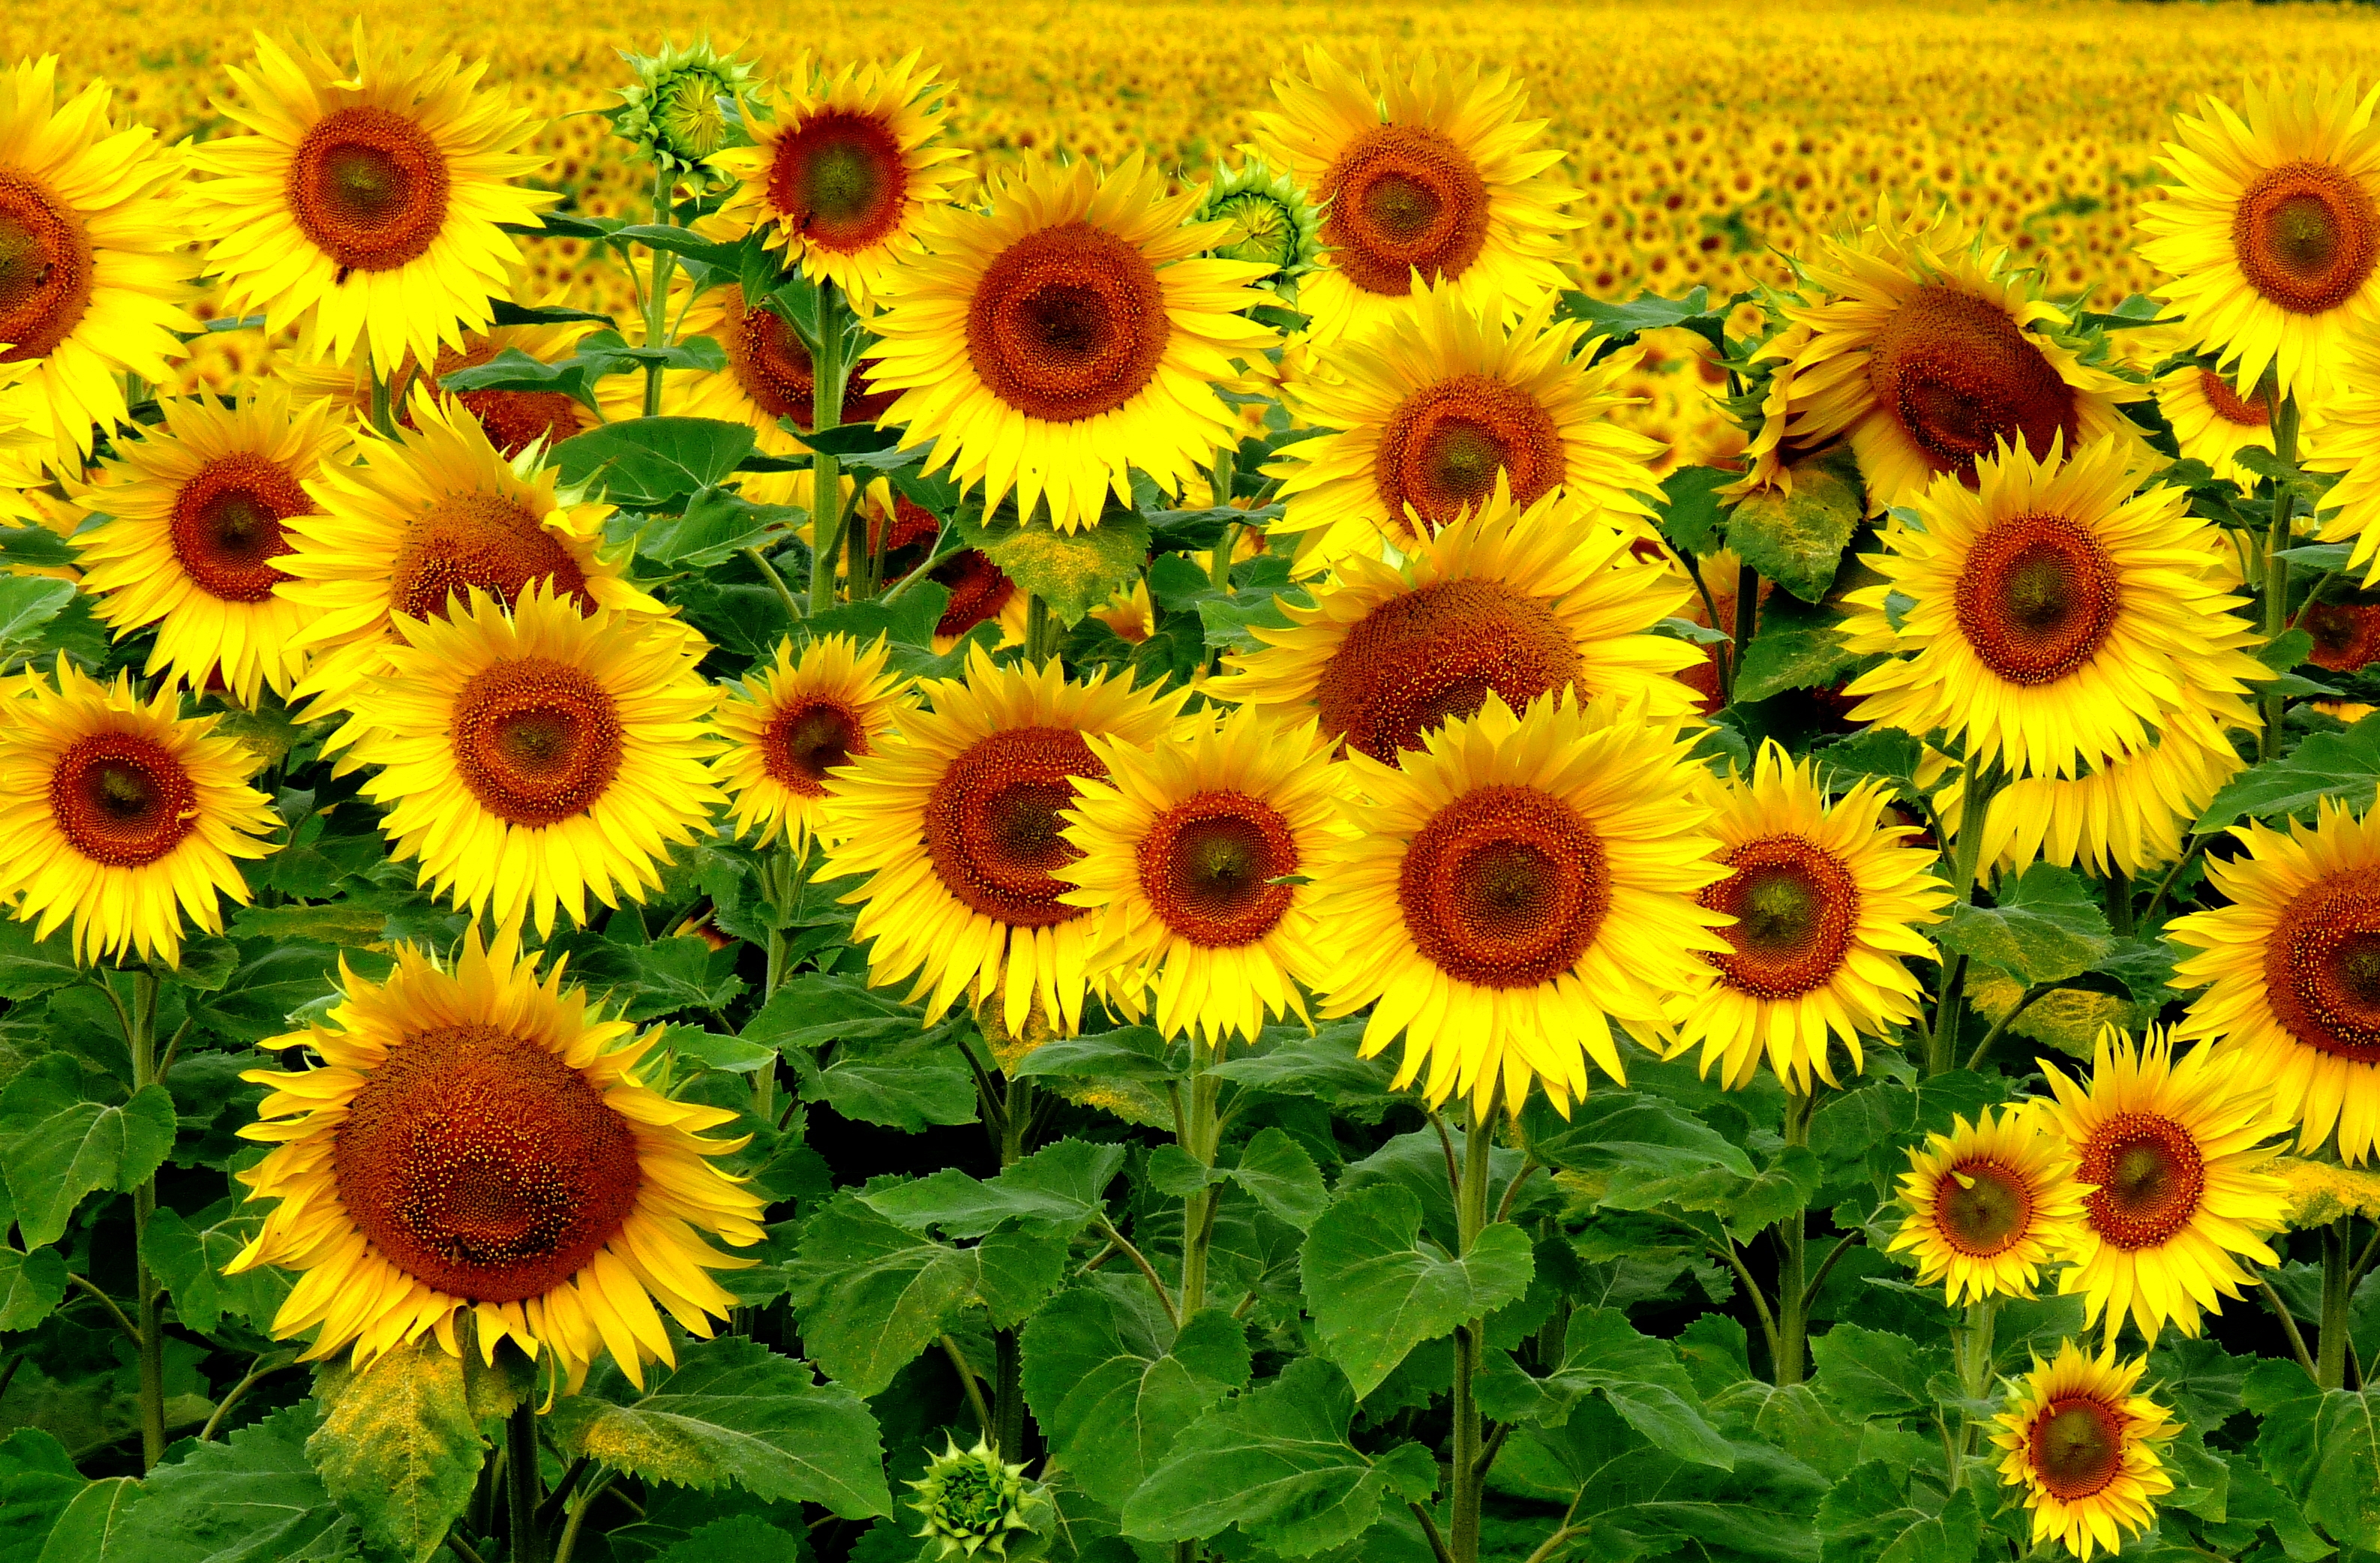 68337 download wallpaper landscape, nature, sunflowers, field screensavers and pictures for free